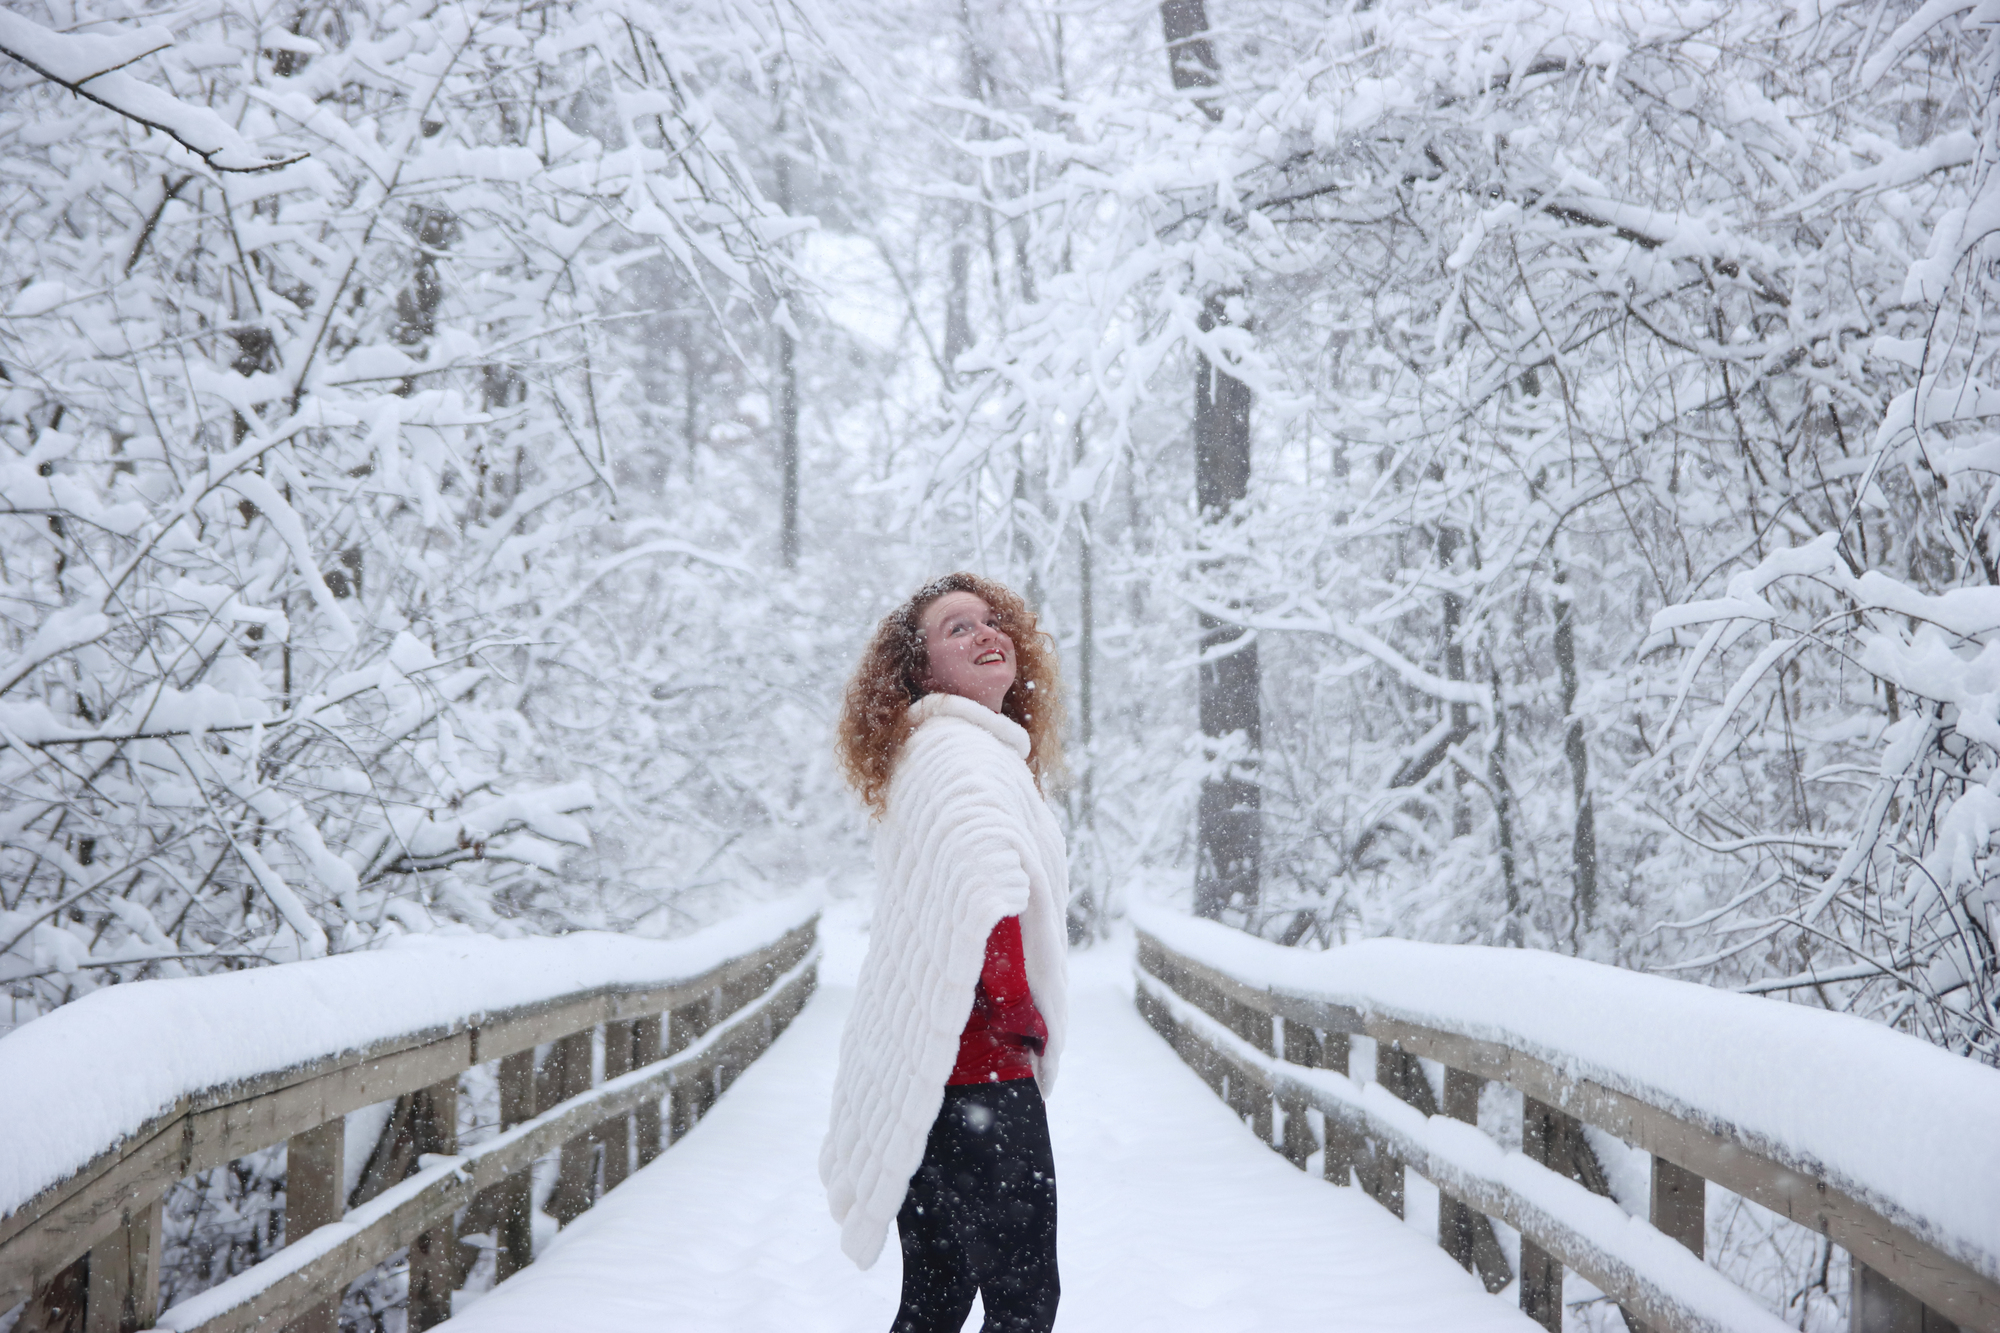 A young woman with bright red hair wearing a bright red outfit poses on a bridge during a snow storm. The contrasting colors are